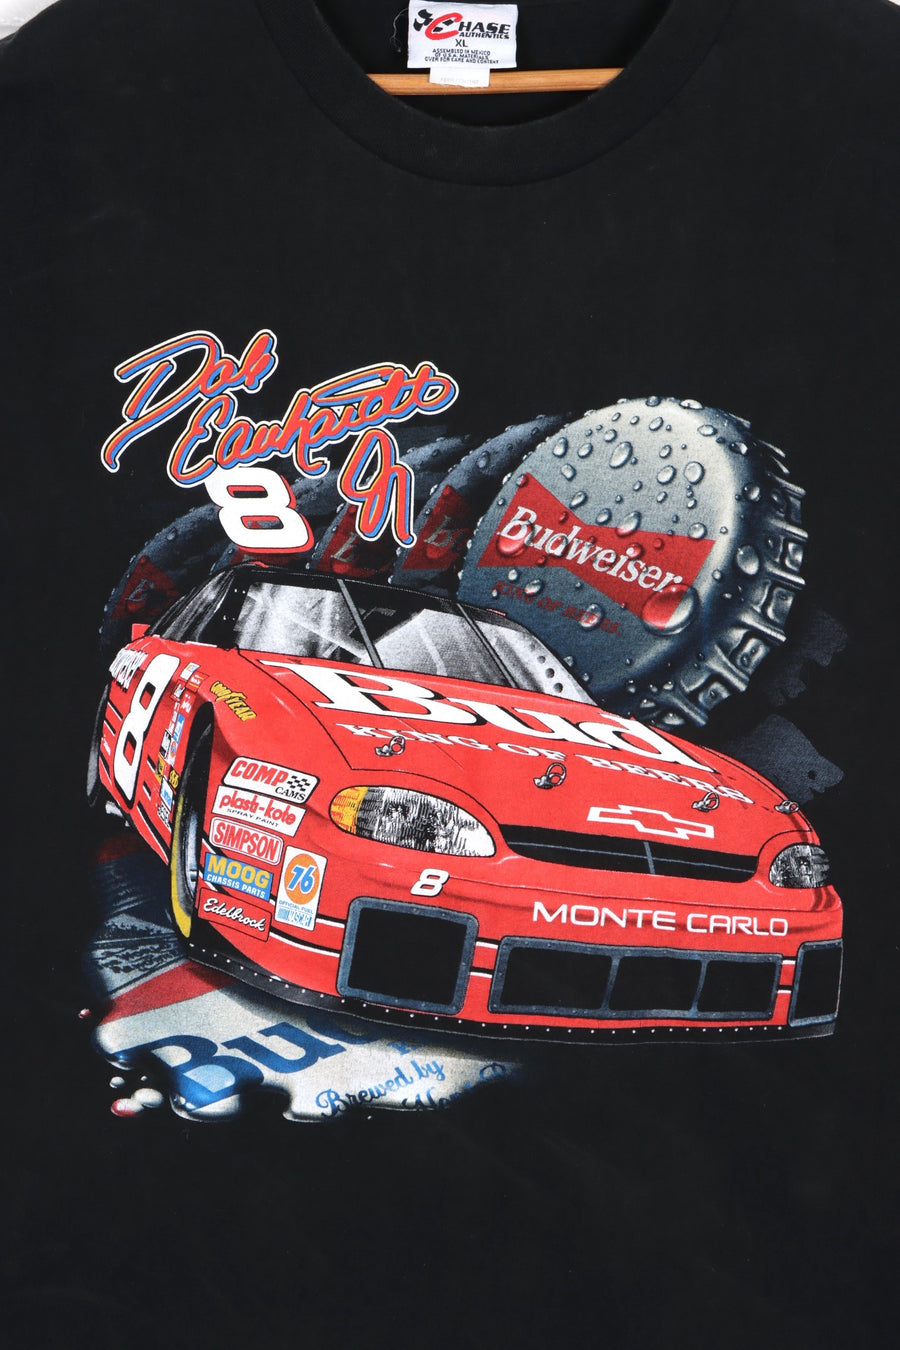 NASCAR Dale Earnhardt Jr “Racing to the Top” Budweiser Front Back T-Shirt (L)